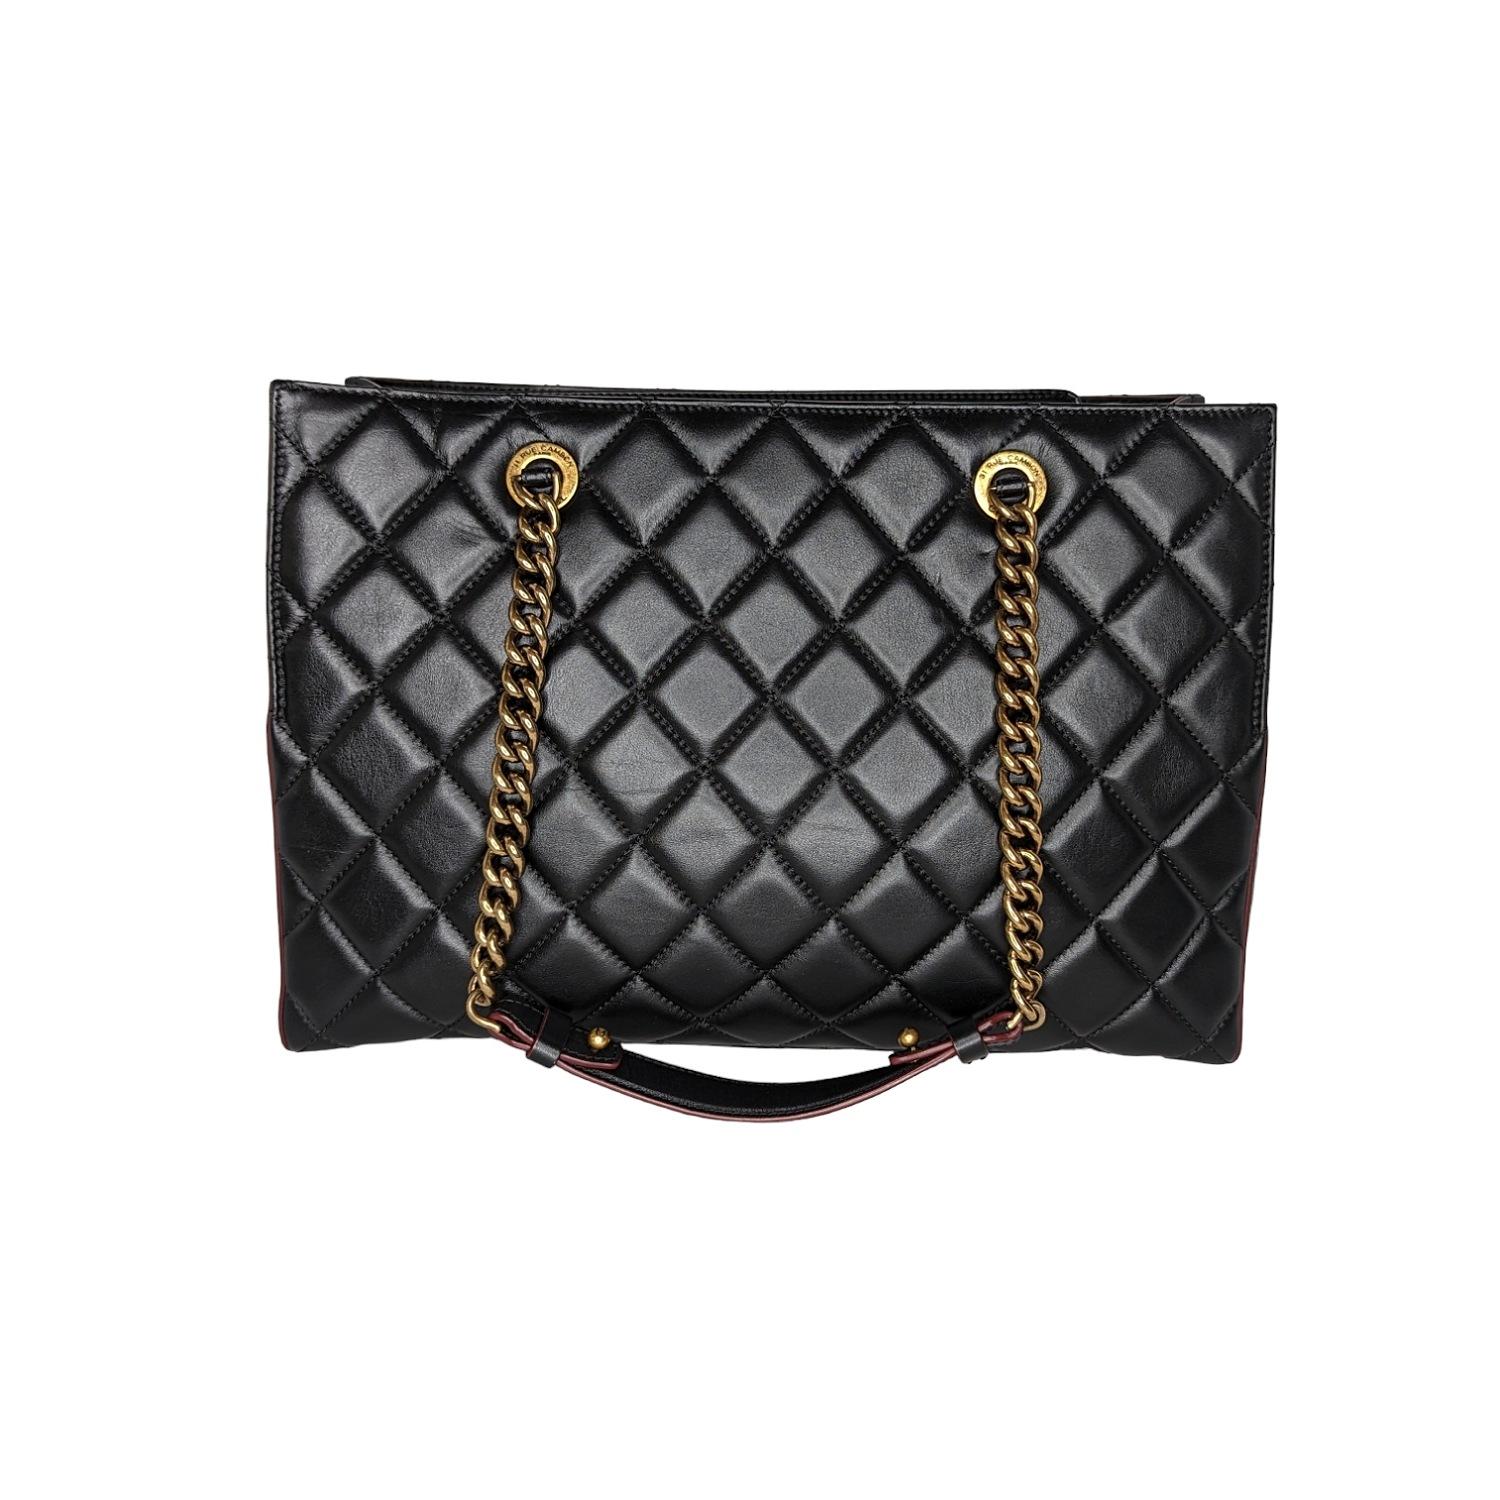 From the Pre-Fall 2012 Collection by Karl Lagerfeld. This edgy newer style features luxurious calfskin leather in signature diamond shaped quilting with a burgundy trim. The shoulder straps are crafted of a prominent aged brass chain strap with a